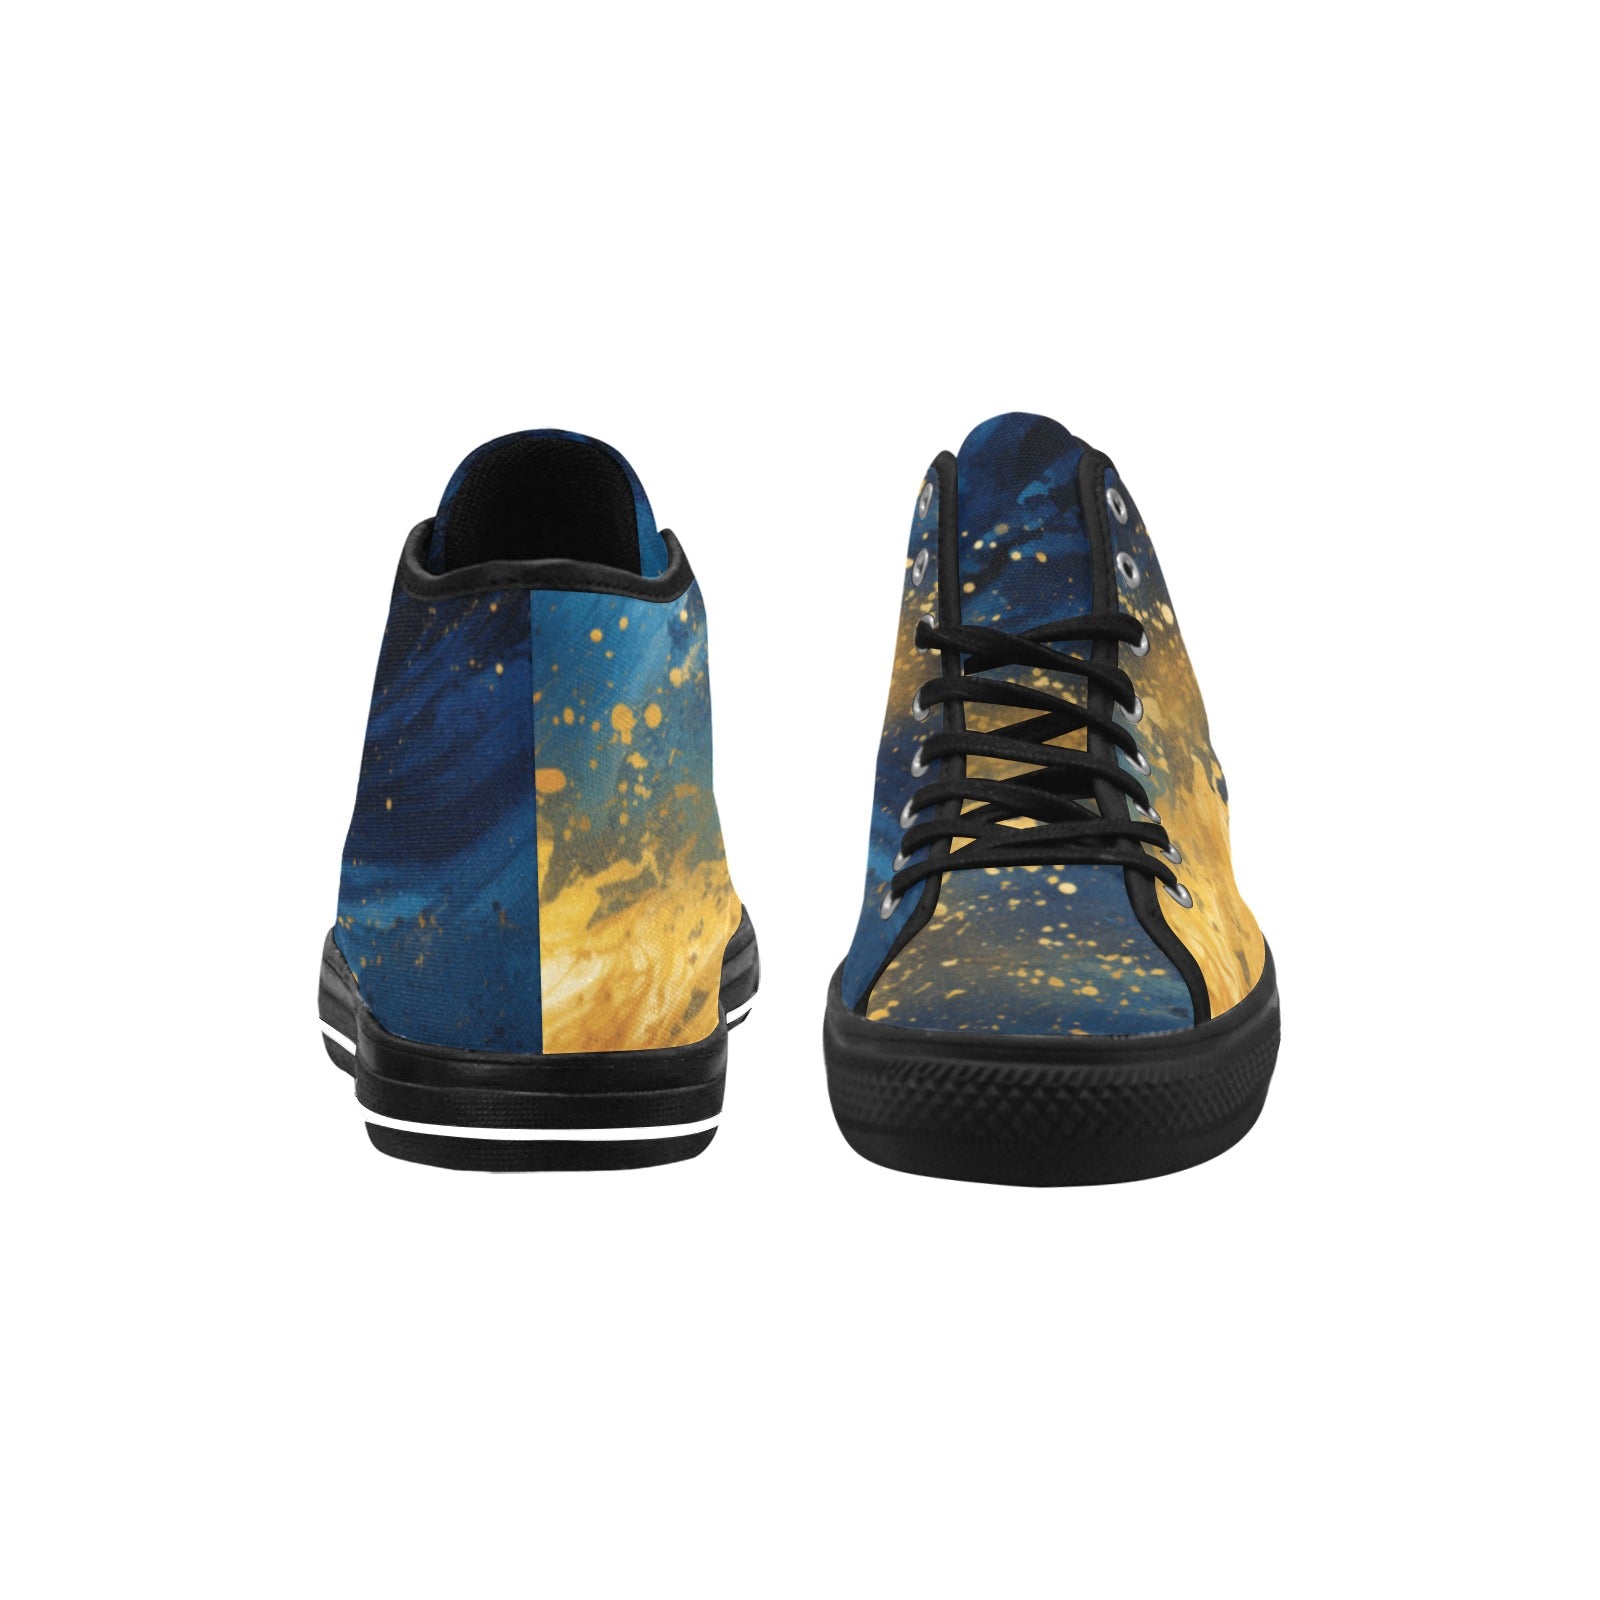 Gold & Blue Vancouver High Top Canvas Shoes for Women - Stylish & Personalized